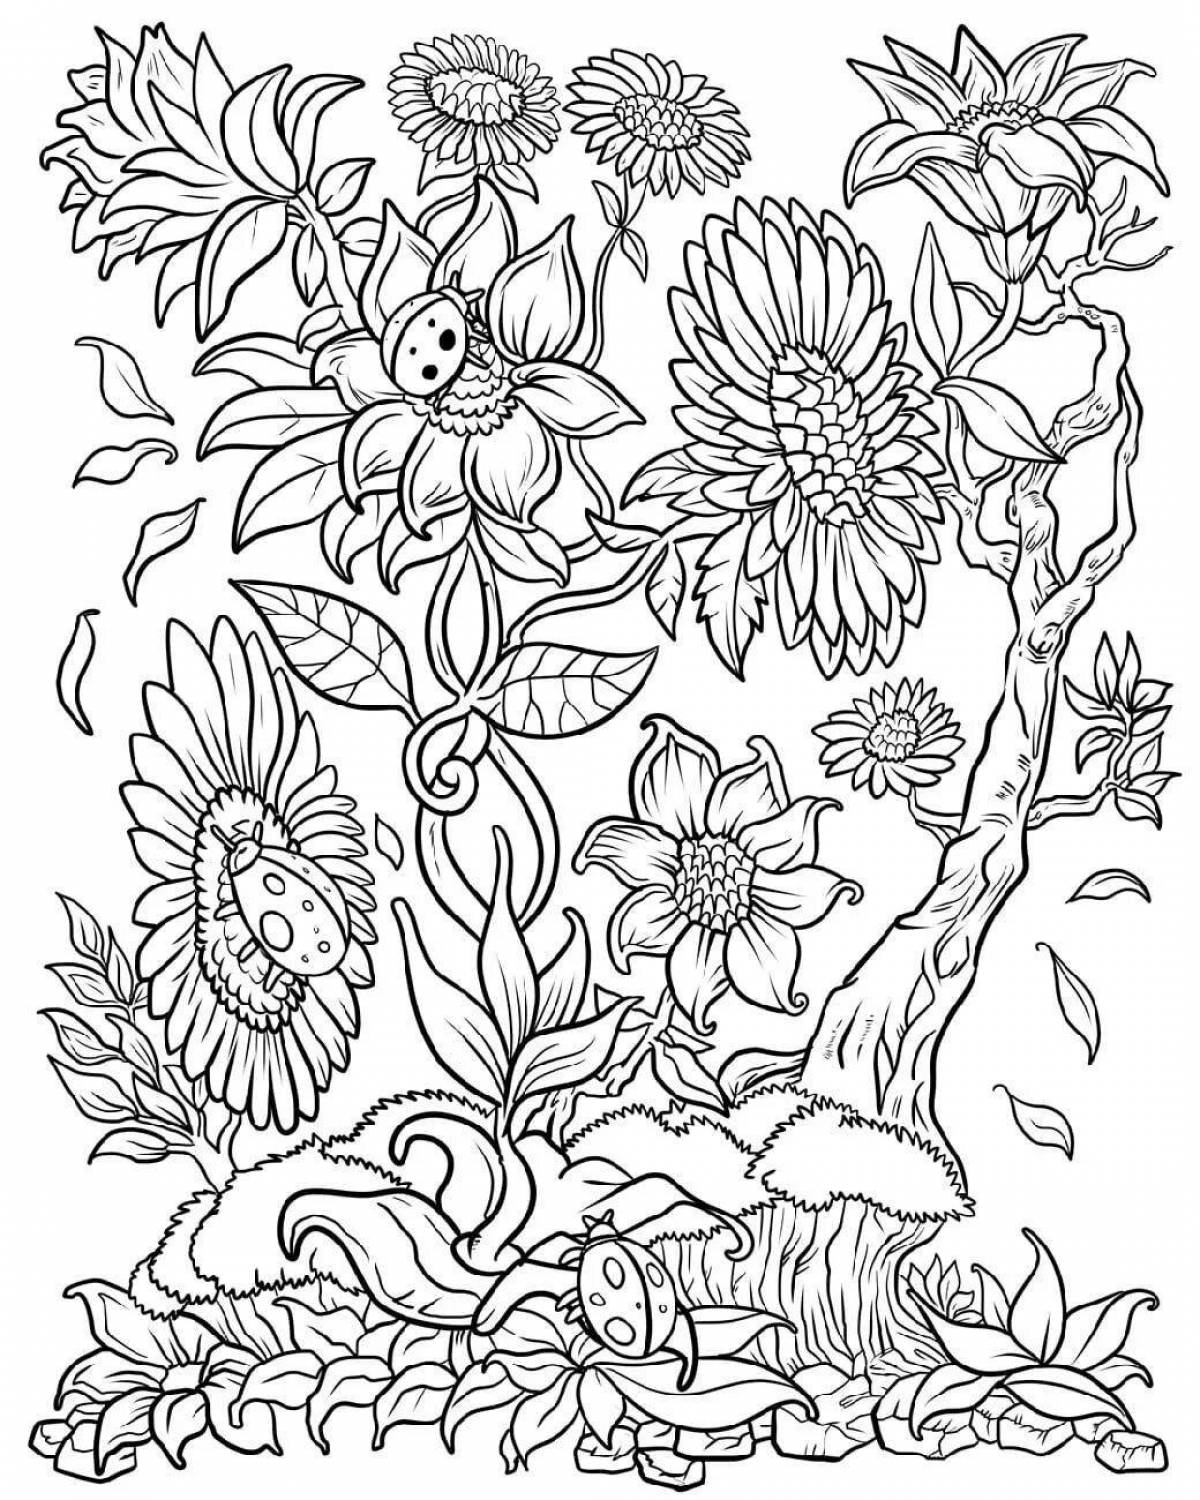 Amazing daisy coloring page